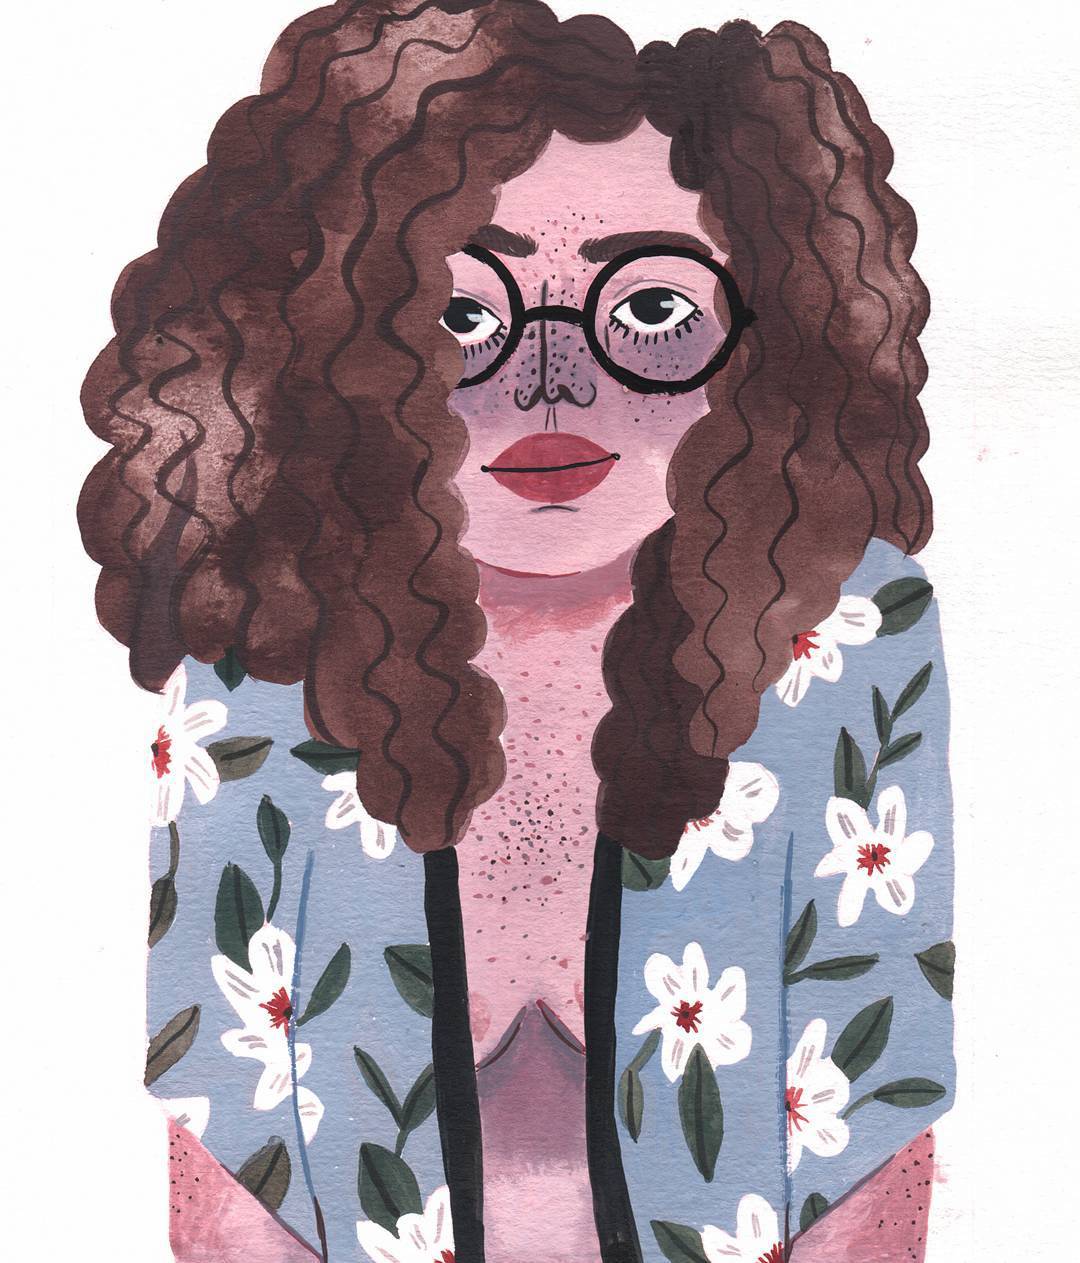 Illustrated portrait of a woman by Brunna Mancuso